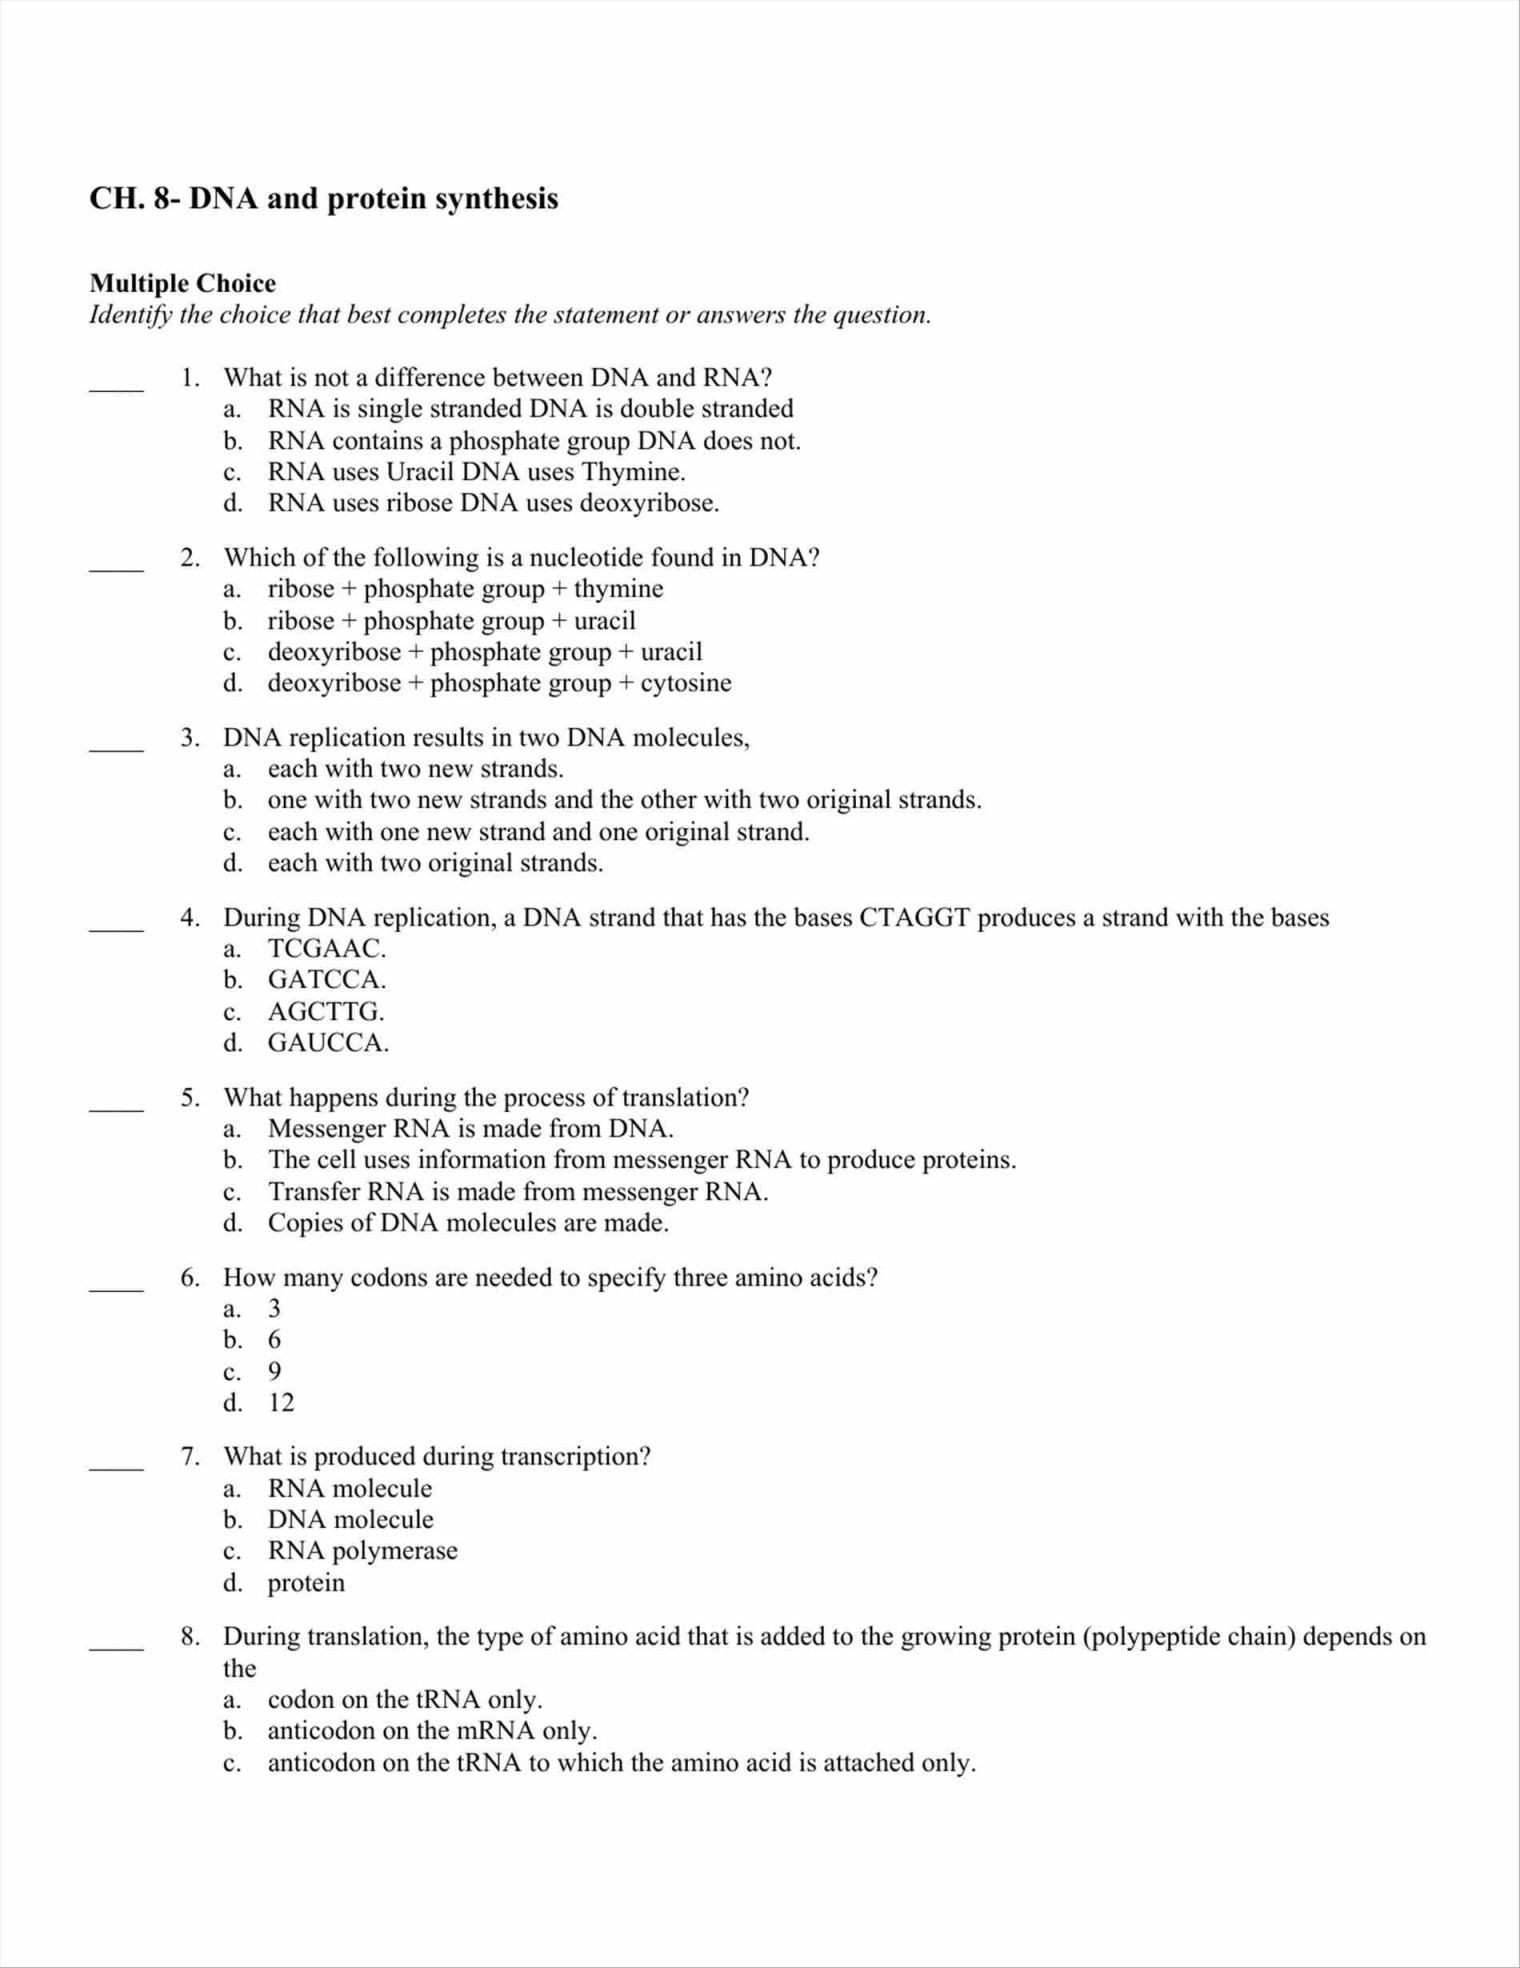 Nucleic Acids Worksheet Answers Nucleic Acid and Protein Synthesis Worksheet Nidecmege